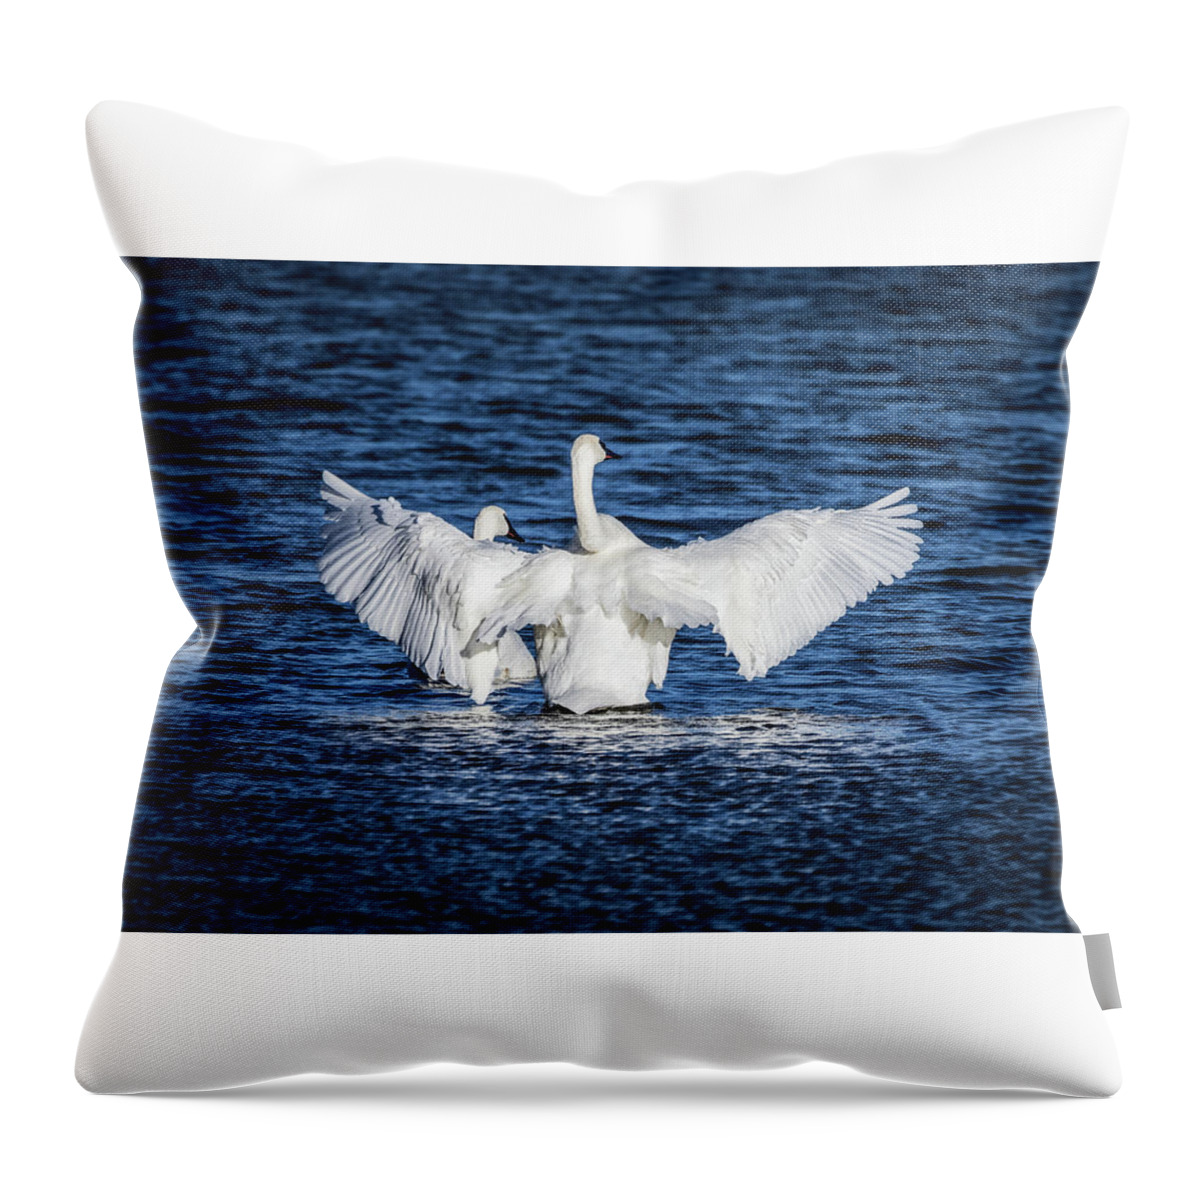 British Columbia Throw Pillow featuring the photograph Trumpeter Swans by Manpreet Sokhi